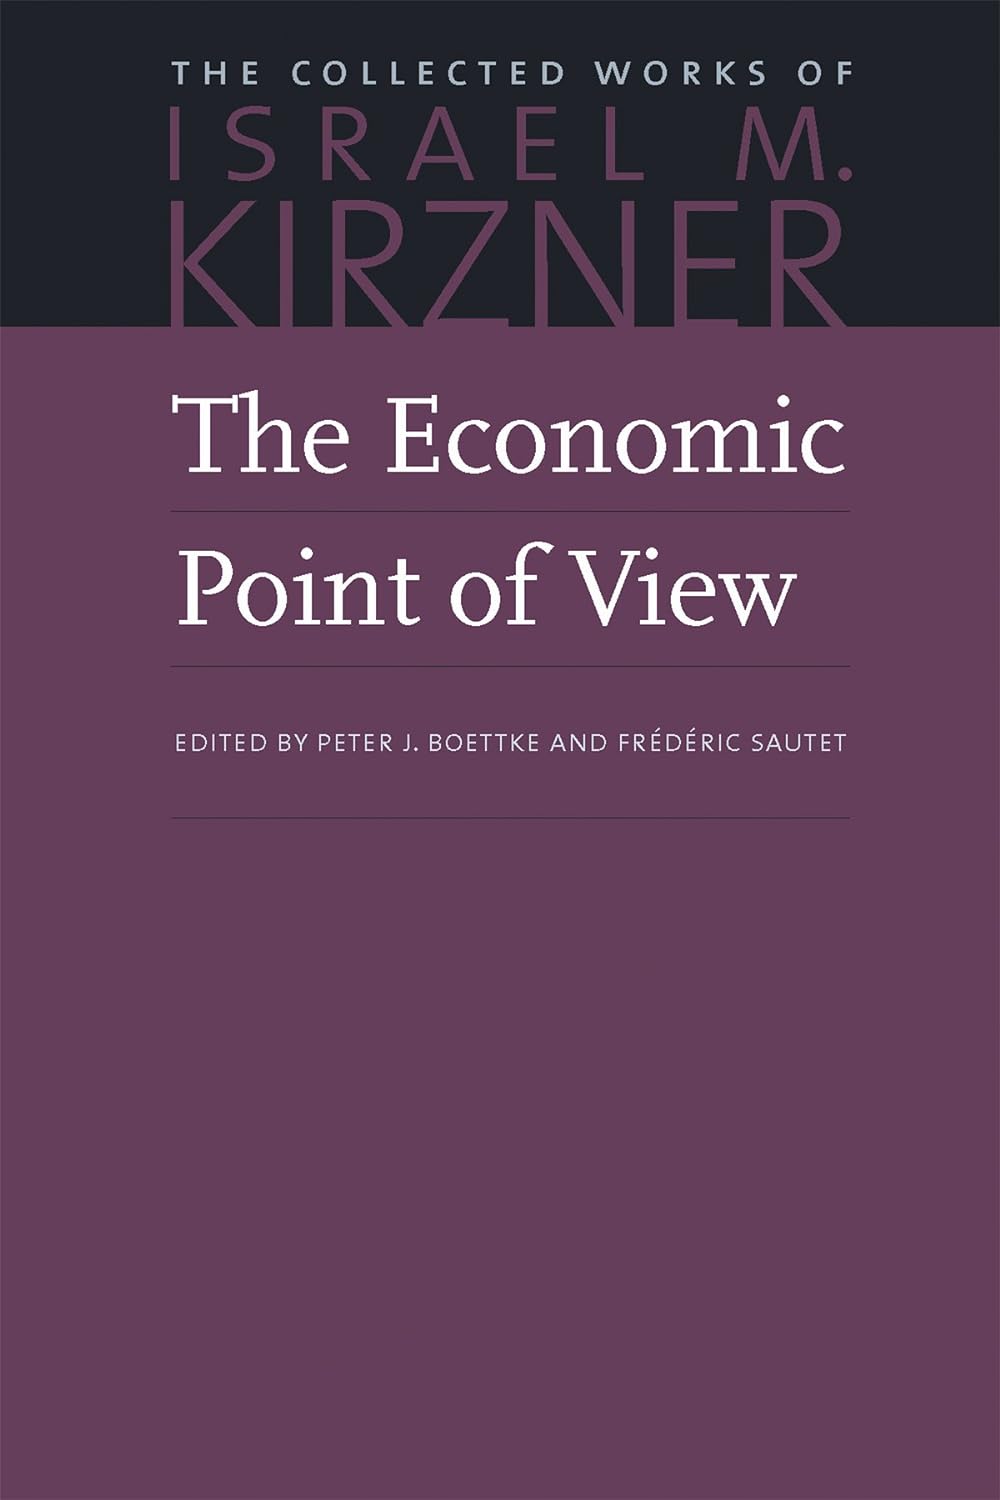 Israel Kirzner, "The Economic Point of View" book cover